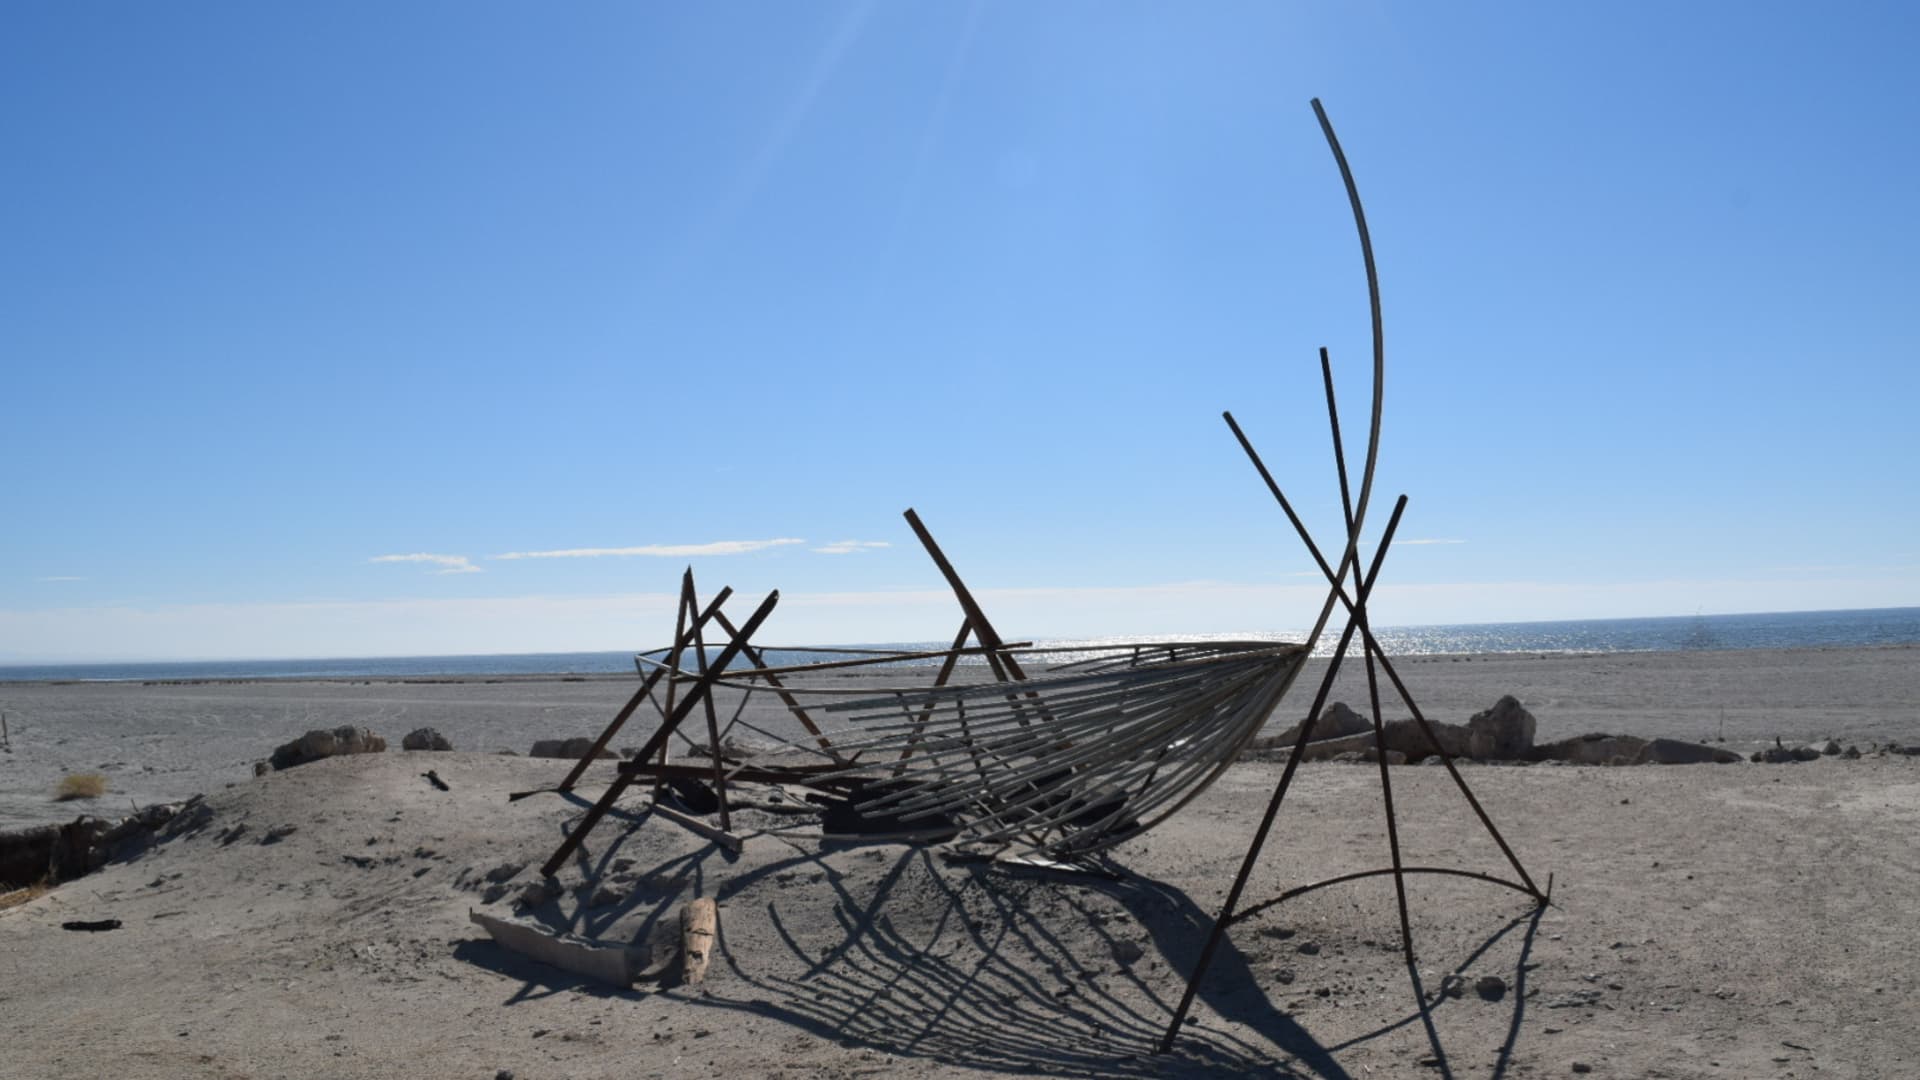 Remains of a burned boat on Bombay beach. Bombay was once a popular tourist destination, but the increasing salinity, shrinking and fumes of Salton Sea rendered it a ghost town full of bohemian-style art.